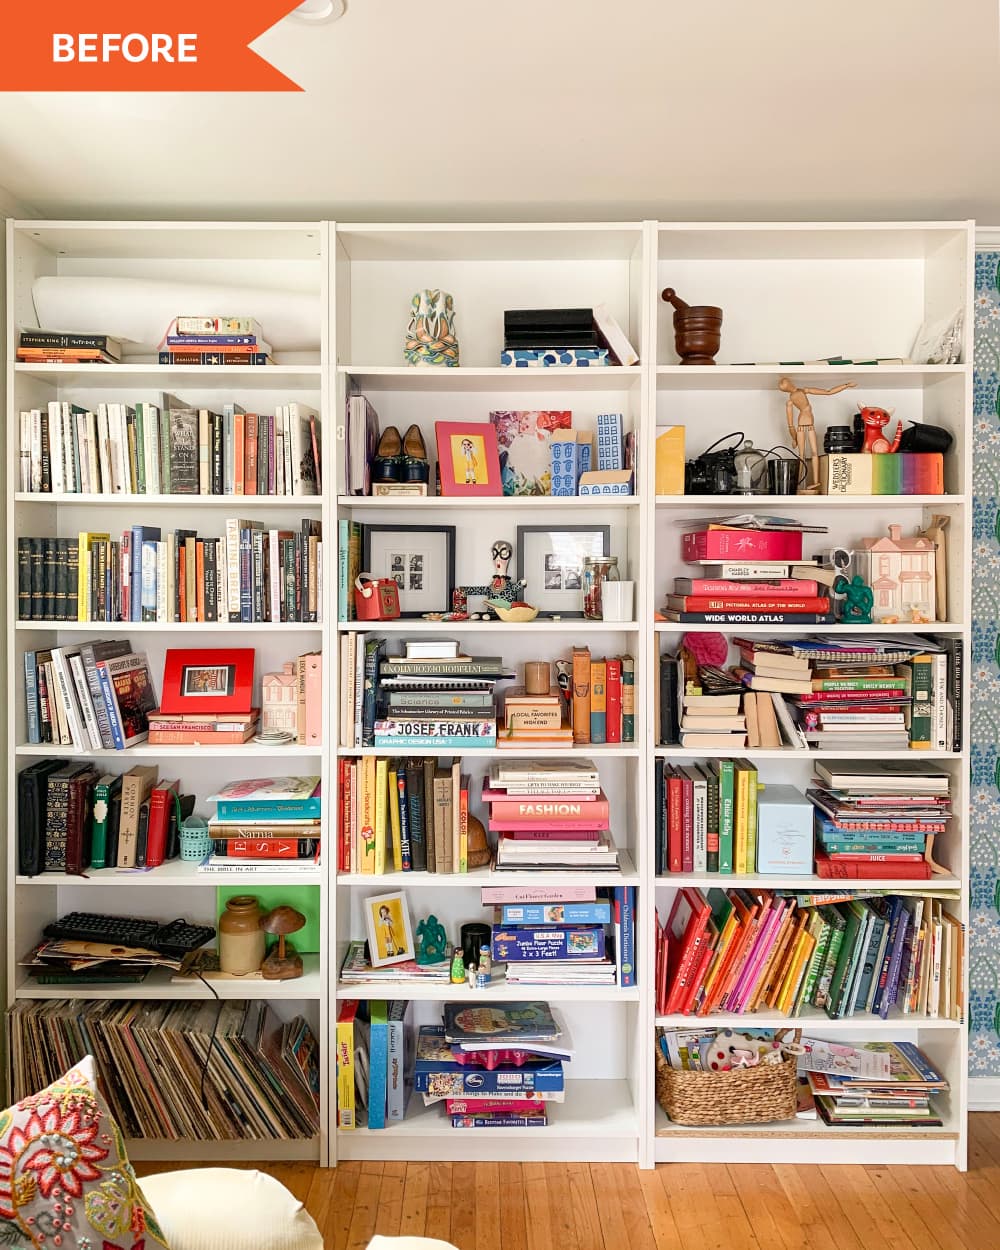 https://cdn.apartmenttherapy.info/image/upload/f_auto,q_auto:eco,w_1000/cb%2FEdit%2F80%2F2022-04-Billy-Bookcase-Makeover%2Fbefore_billybookcase-tag